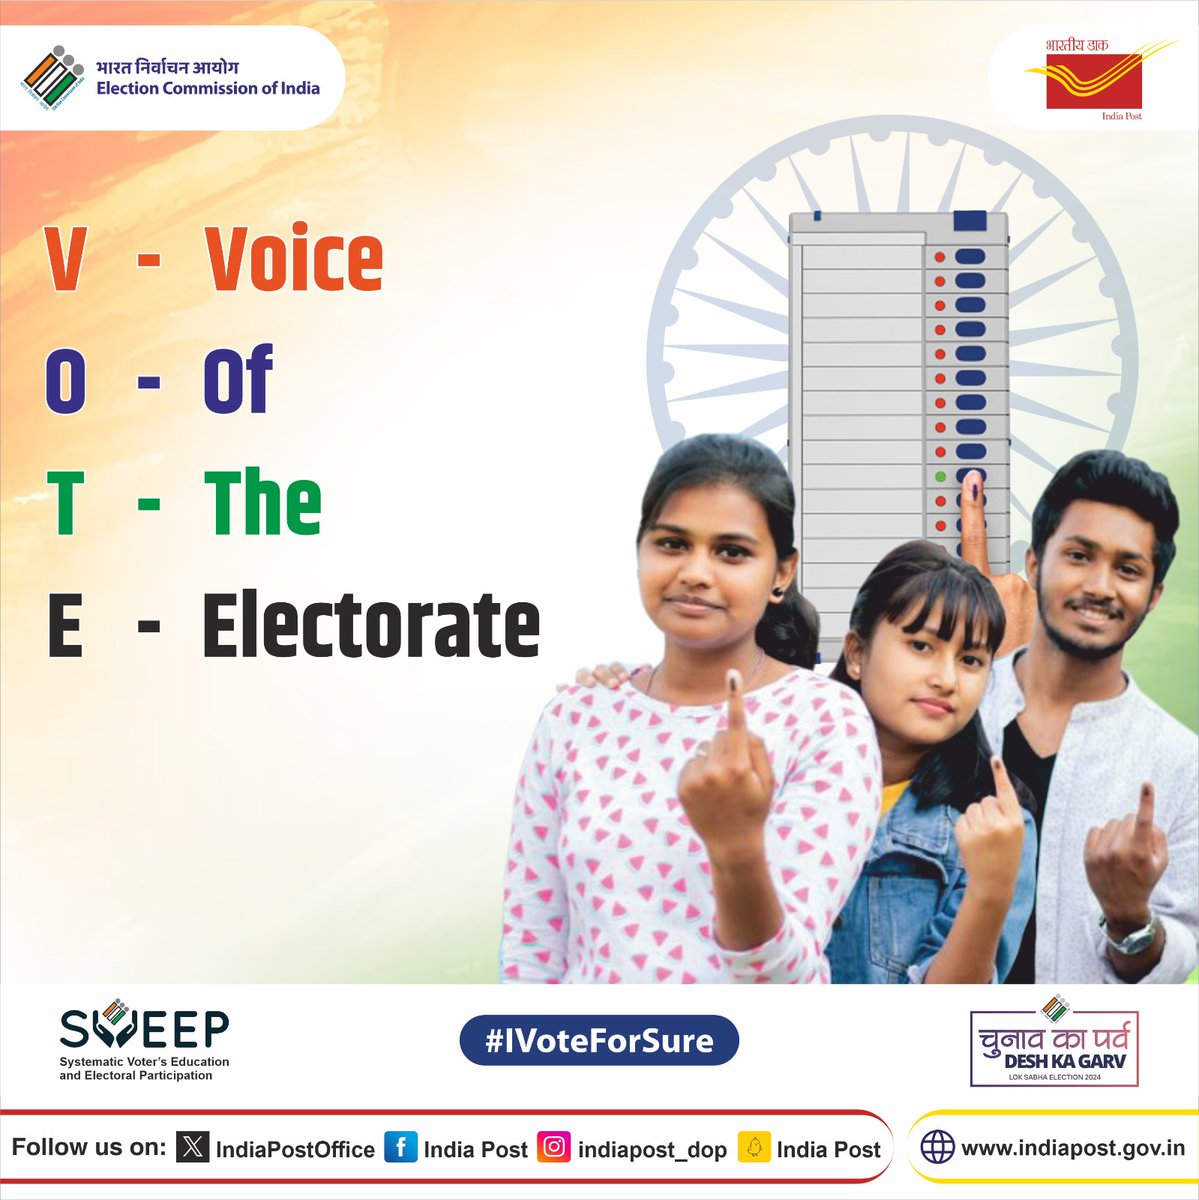 Vote means the voice of the electorate, so come and cast your vote. #IVoteForSure #MeraVoteDeshkeLiye @ECISVEEP